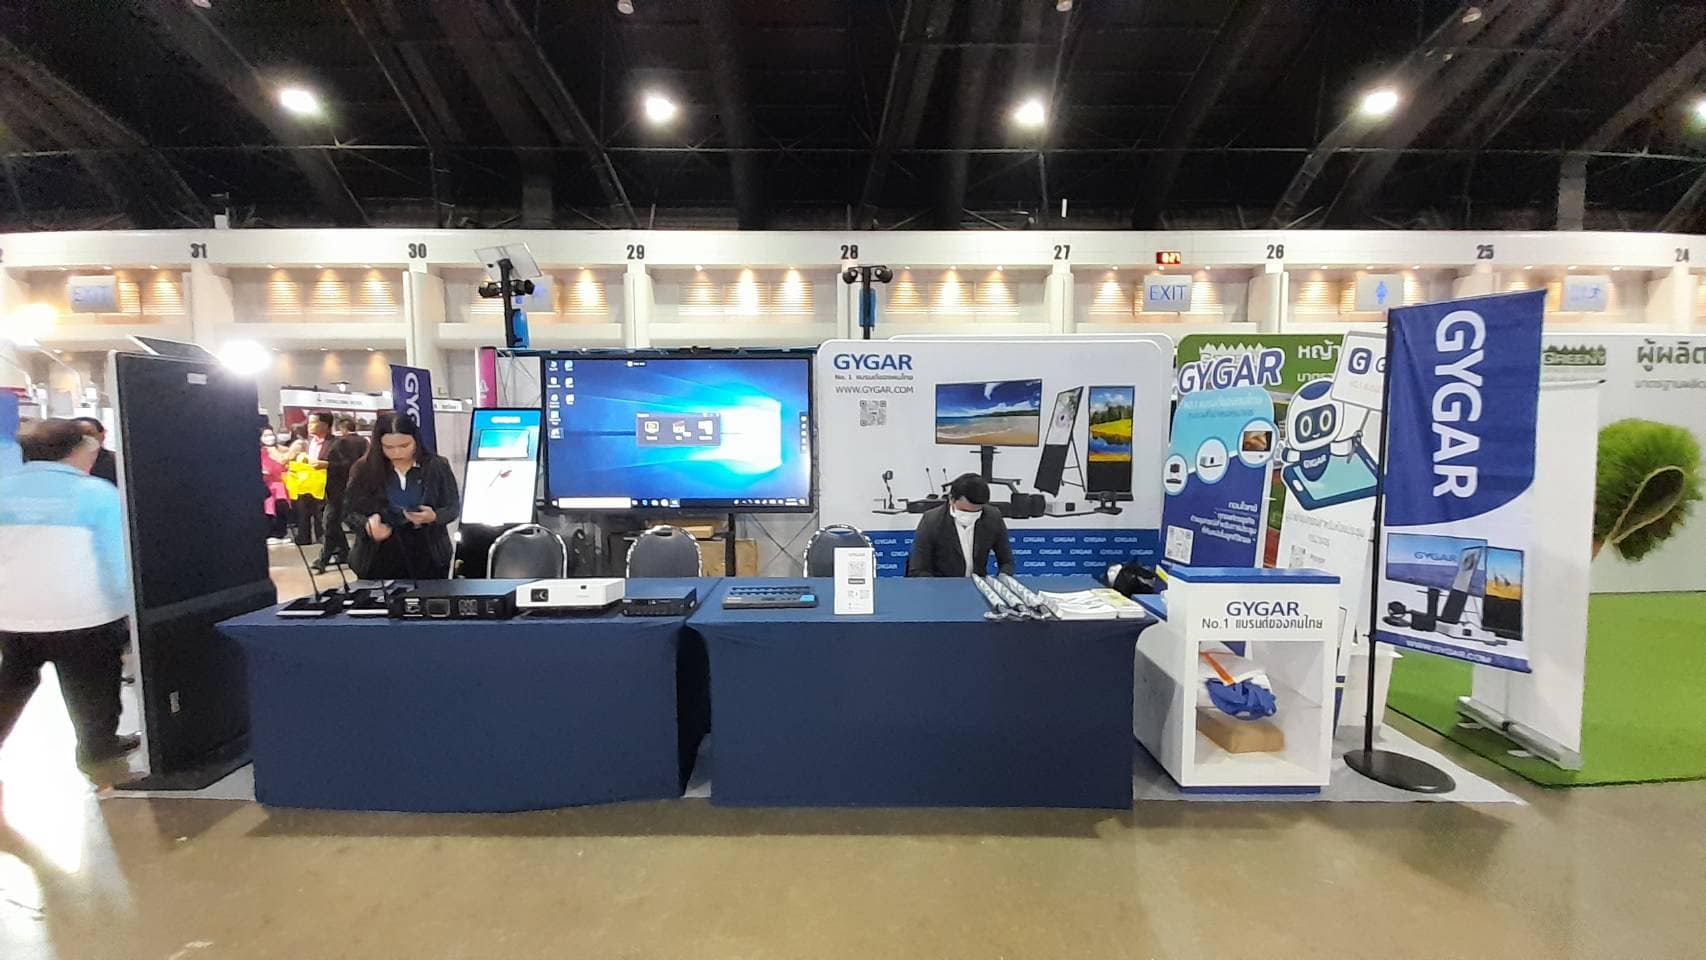 GYGAR participated in the exhibition booth of the Municipal League of Thailand 1